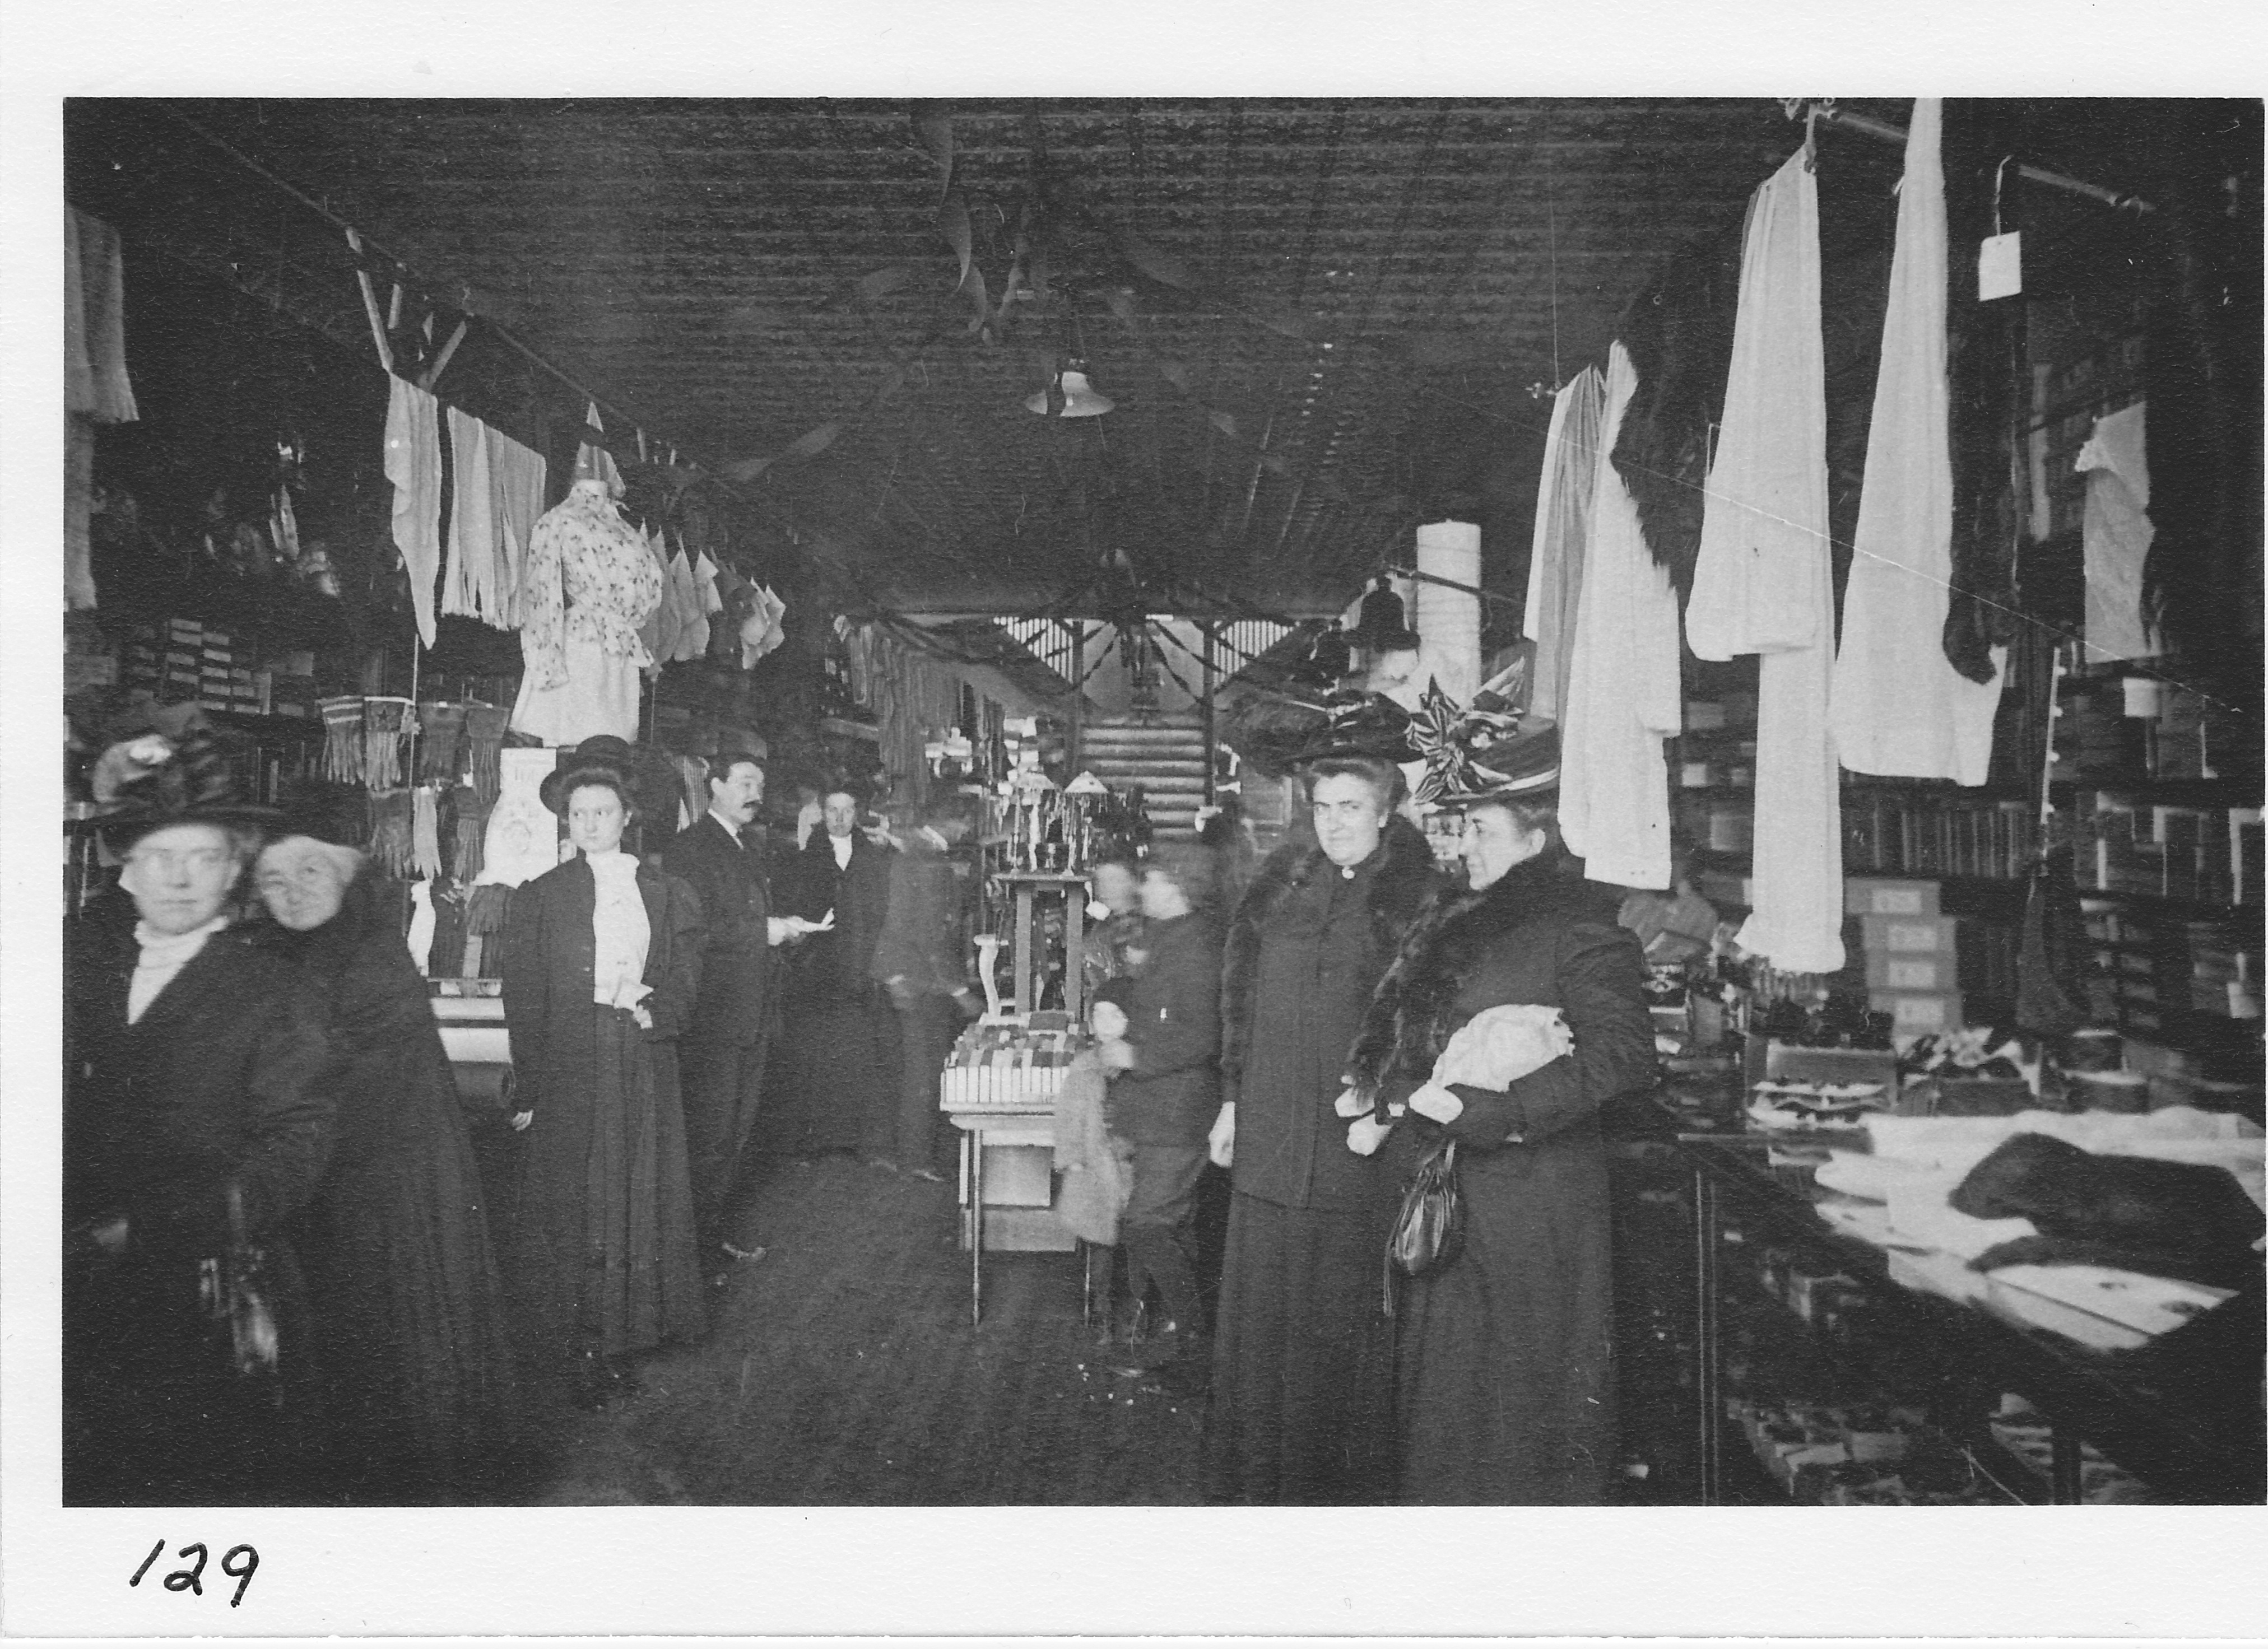 Interior view of the “Fair Store” main floor (Cottrell Bros., West Main St., now Village Inn restaurant.  Standing fourth from left is Clark Cottrell, Sr., owner.